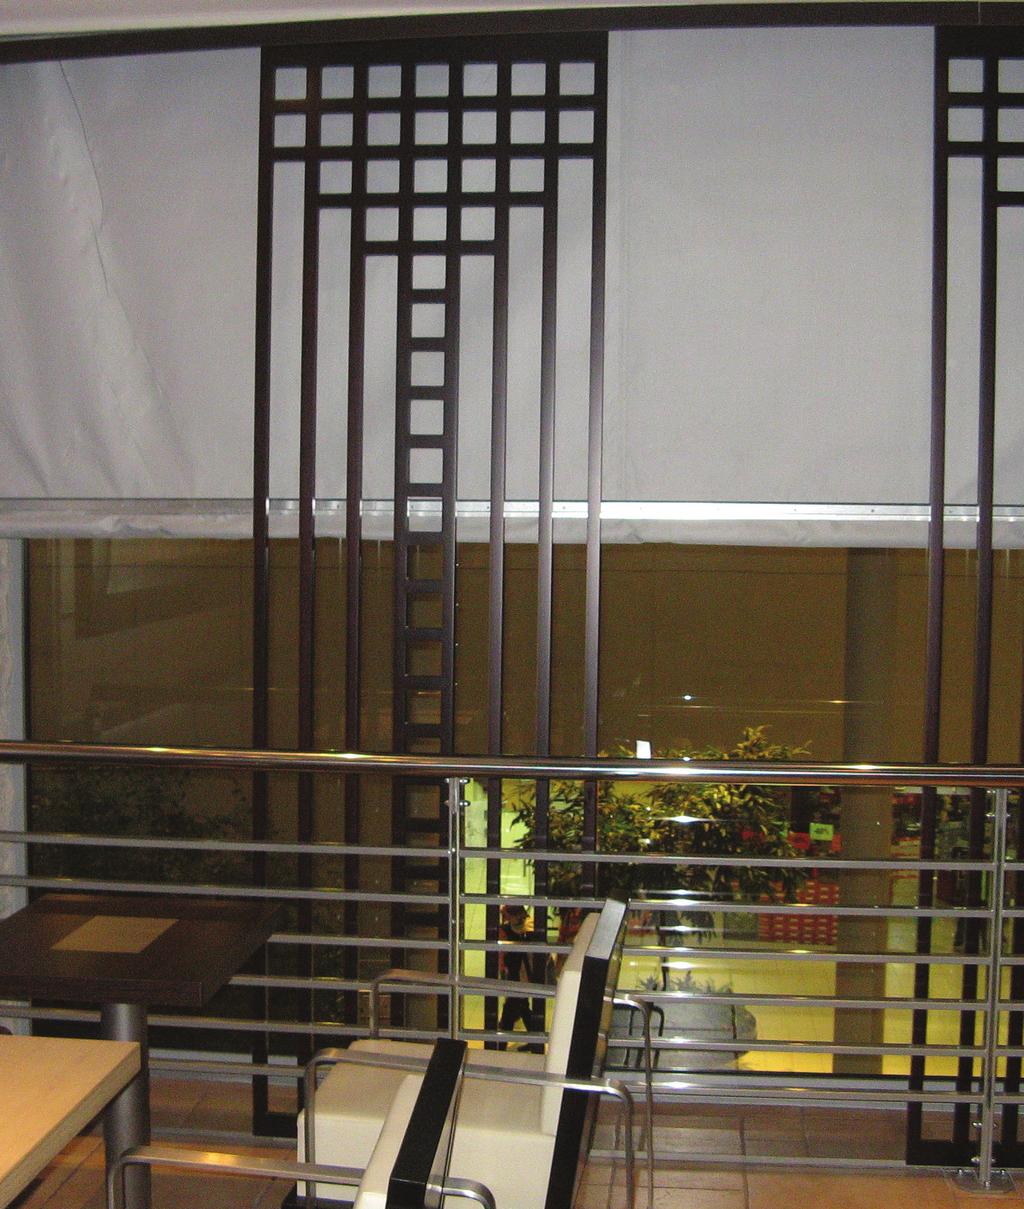 PRODUCT DATA SHEET AUTOMATIC FIRE CURTAIN FM 1 AUTOMATIC FIRE CURTAIN FIRE CURTAIN FM 1 FM-1 fire curtains are used where, if there is a fire, it is necessary to create a temporary barrier within an